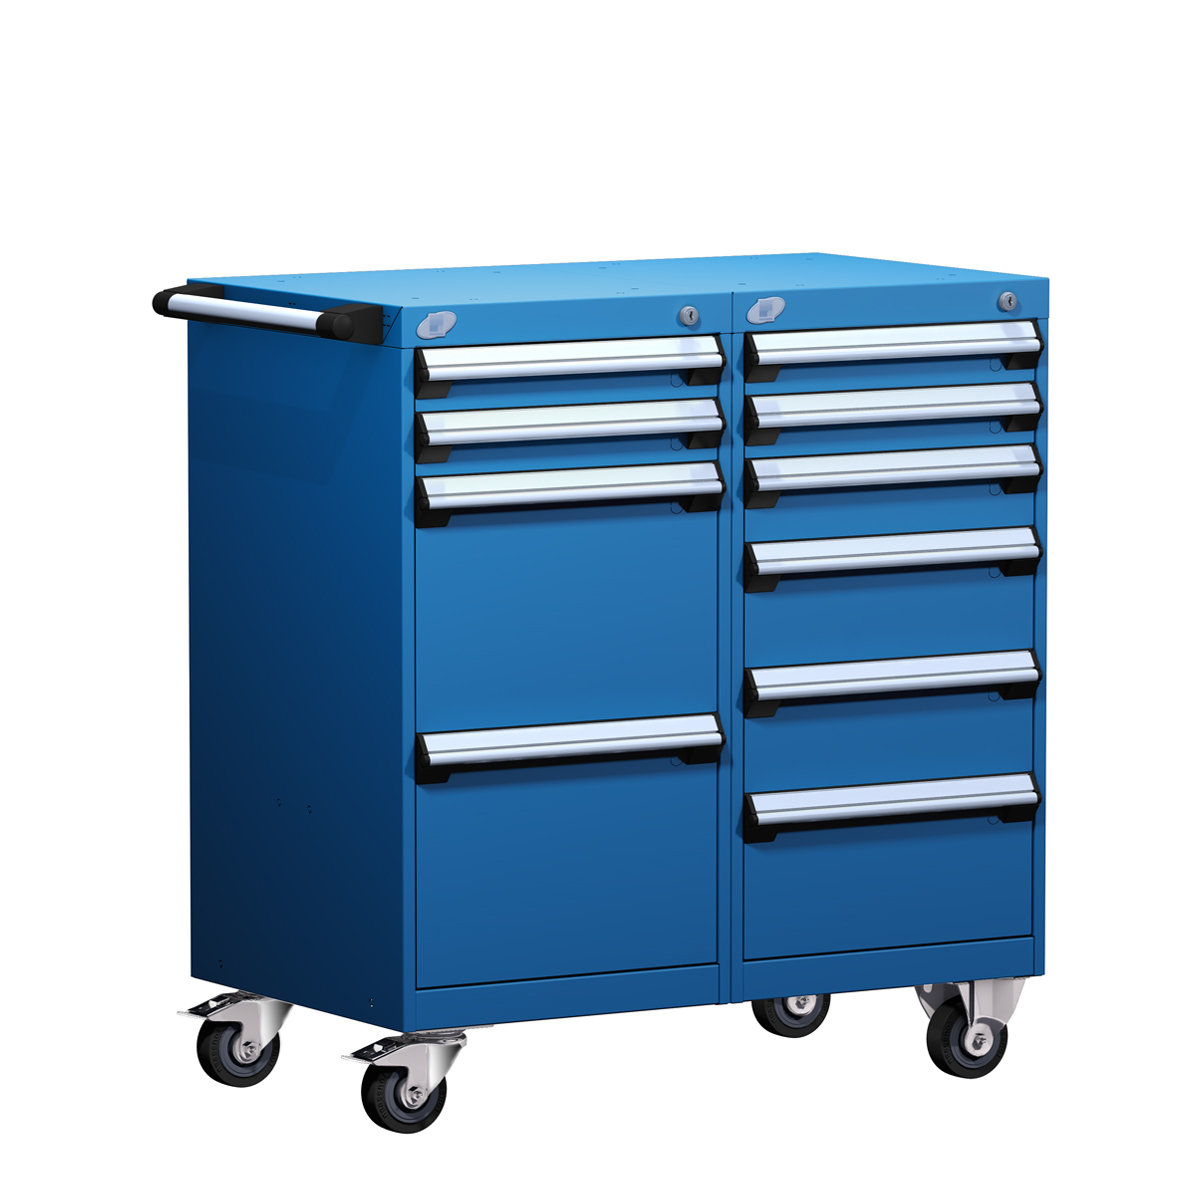 Mobile Compact Cabinet | Buy Online Material Handling & Storage ...